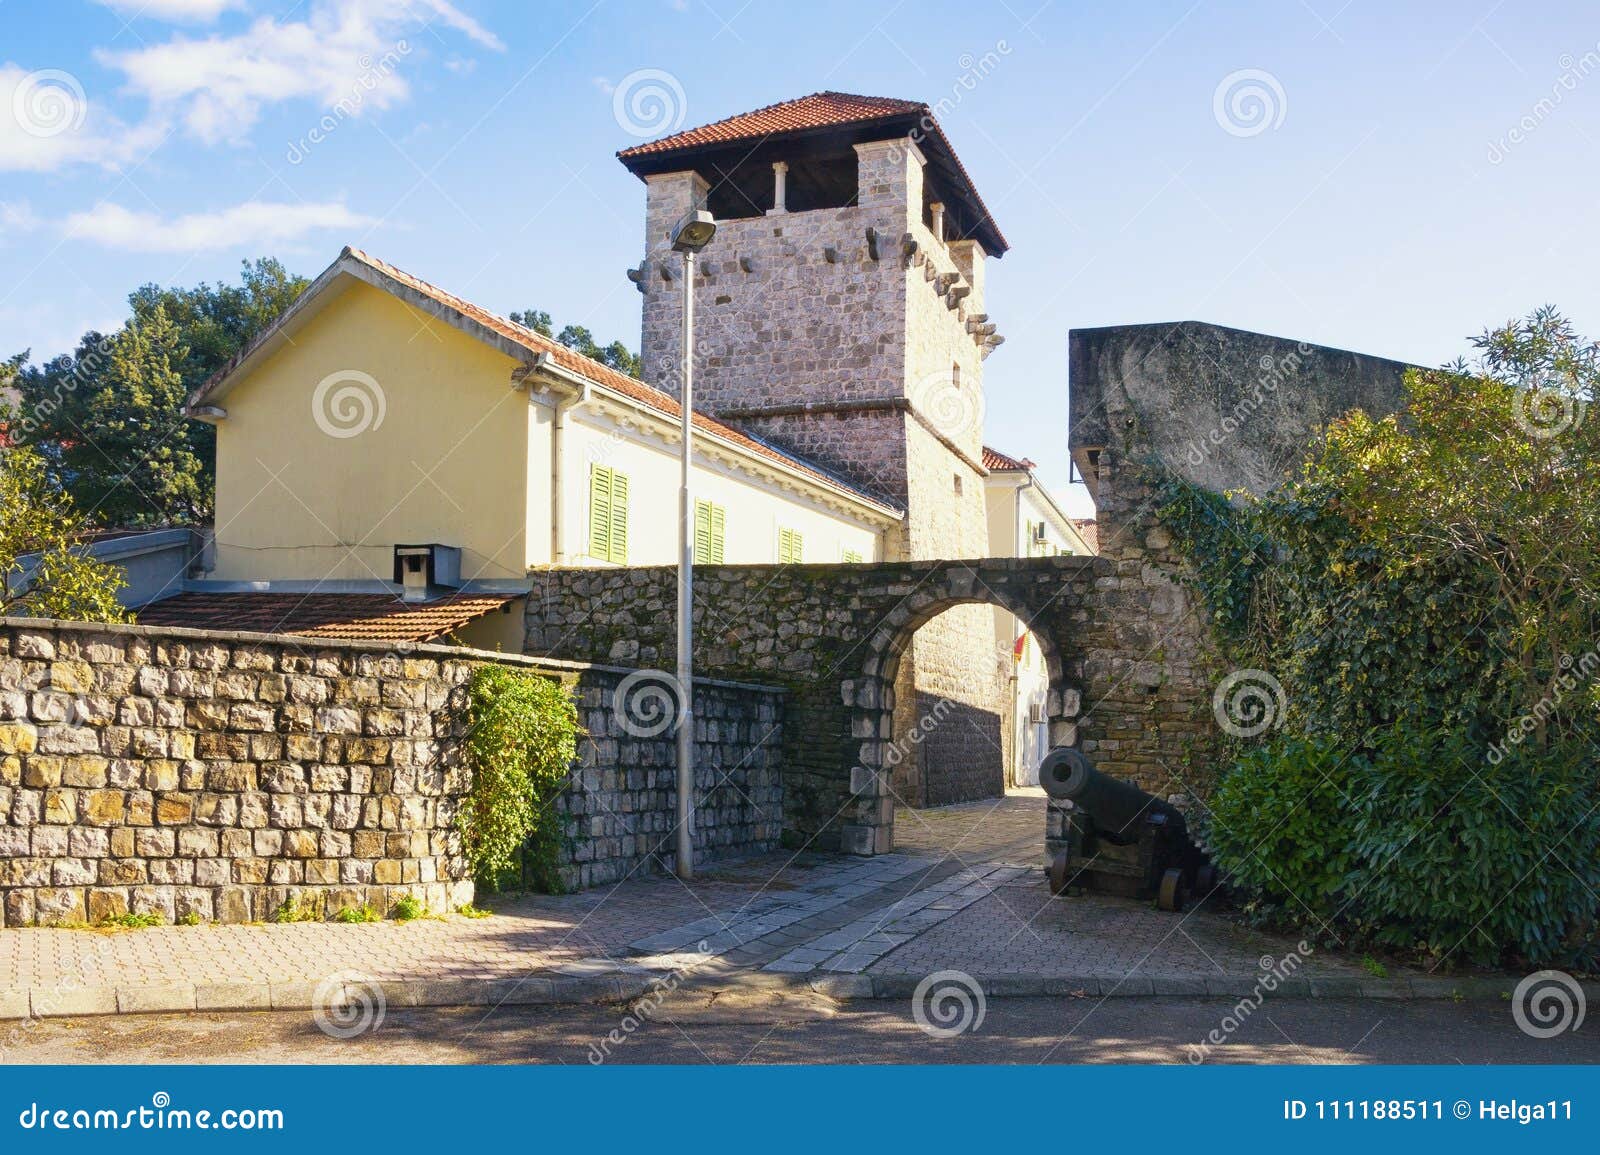 medieval summer house of the buca family . tivat city, montenegro